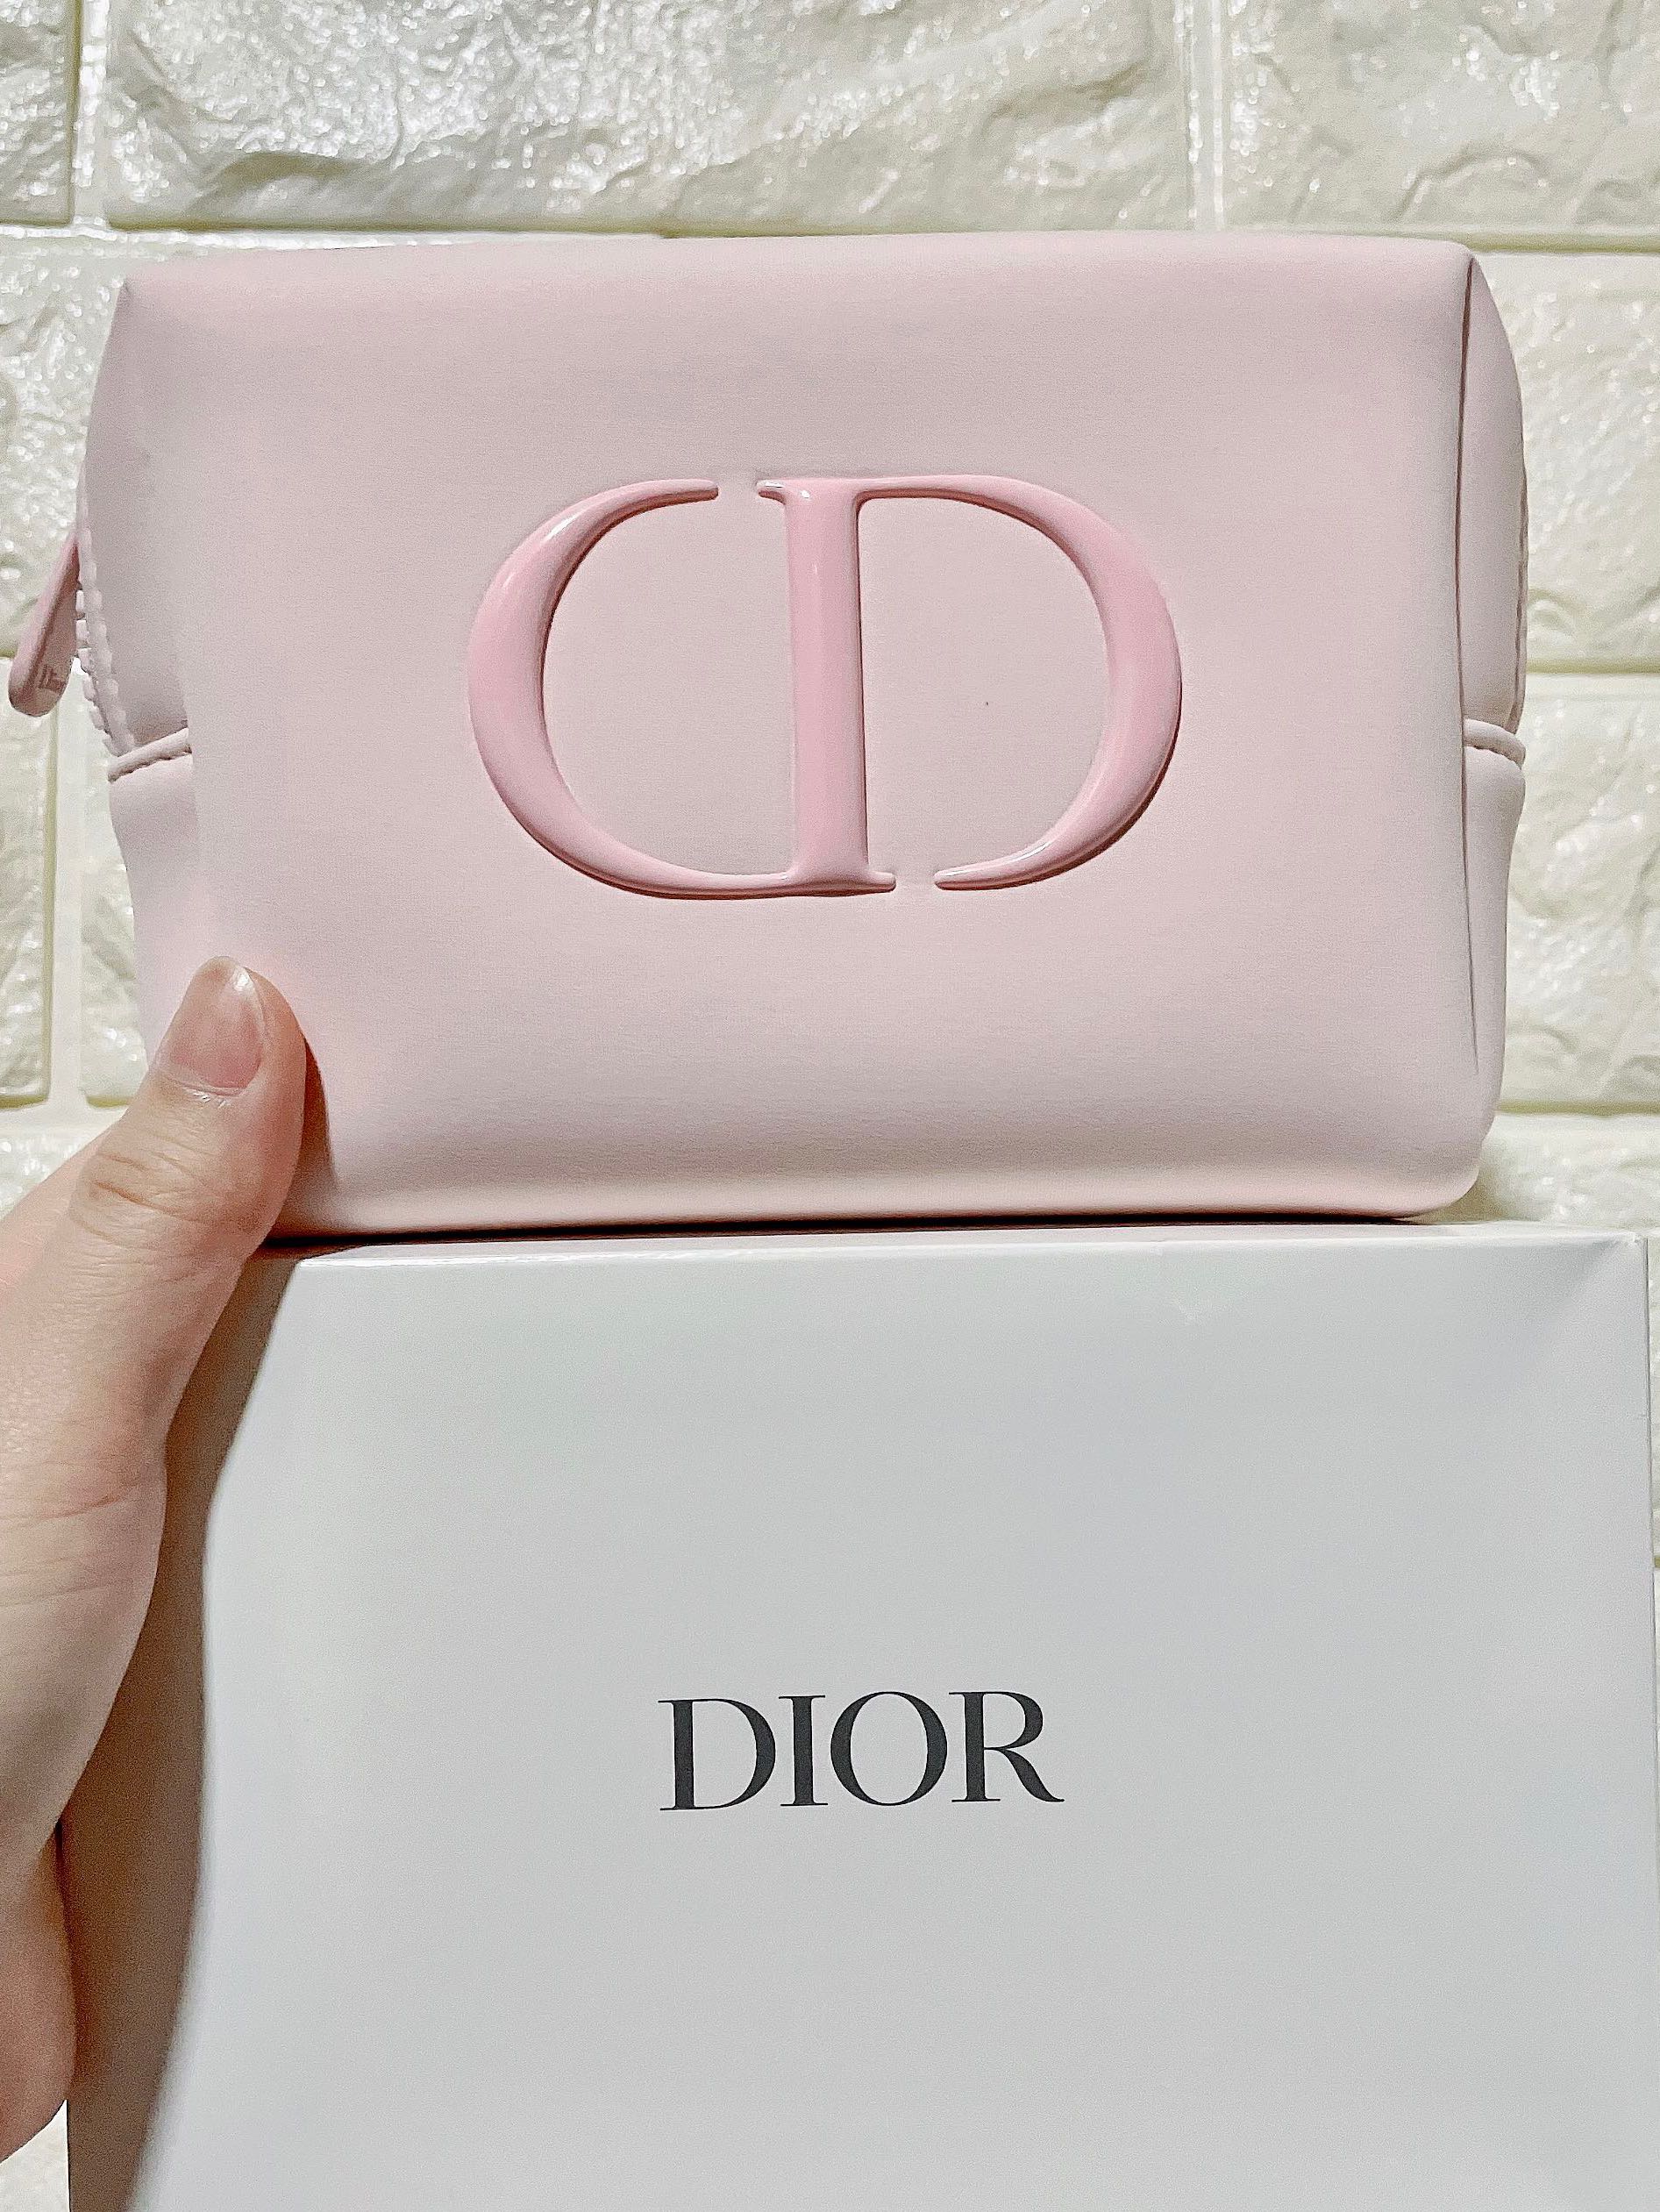 [Authentic] Dior Makeup/ cosmetic pouch/ hand bag/ accessories 